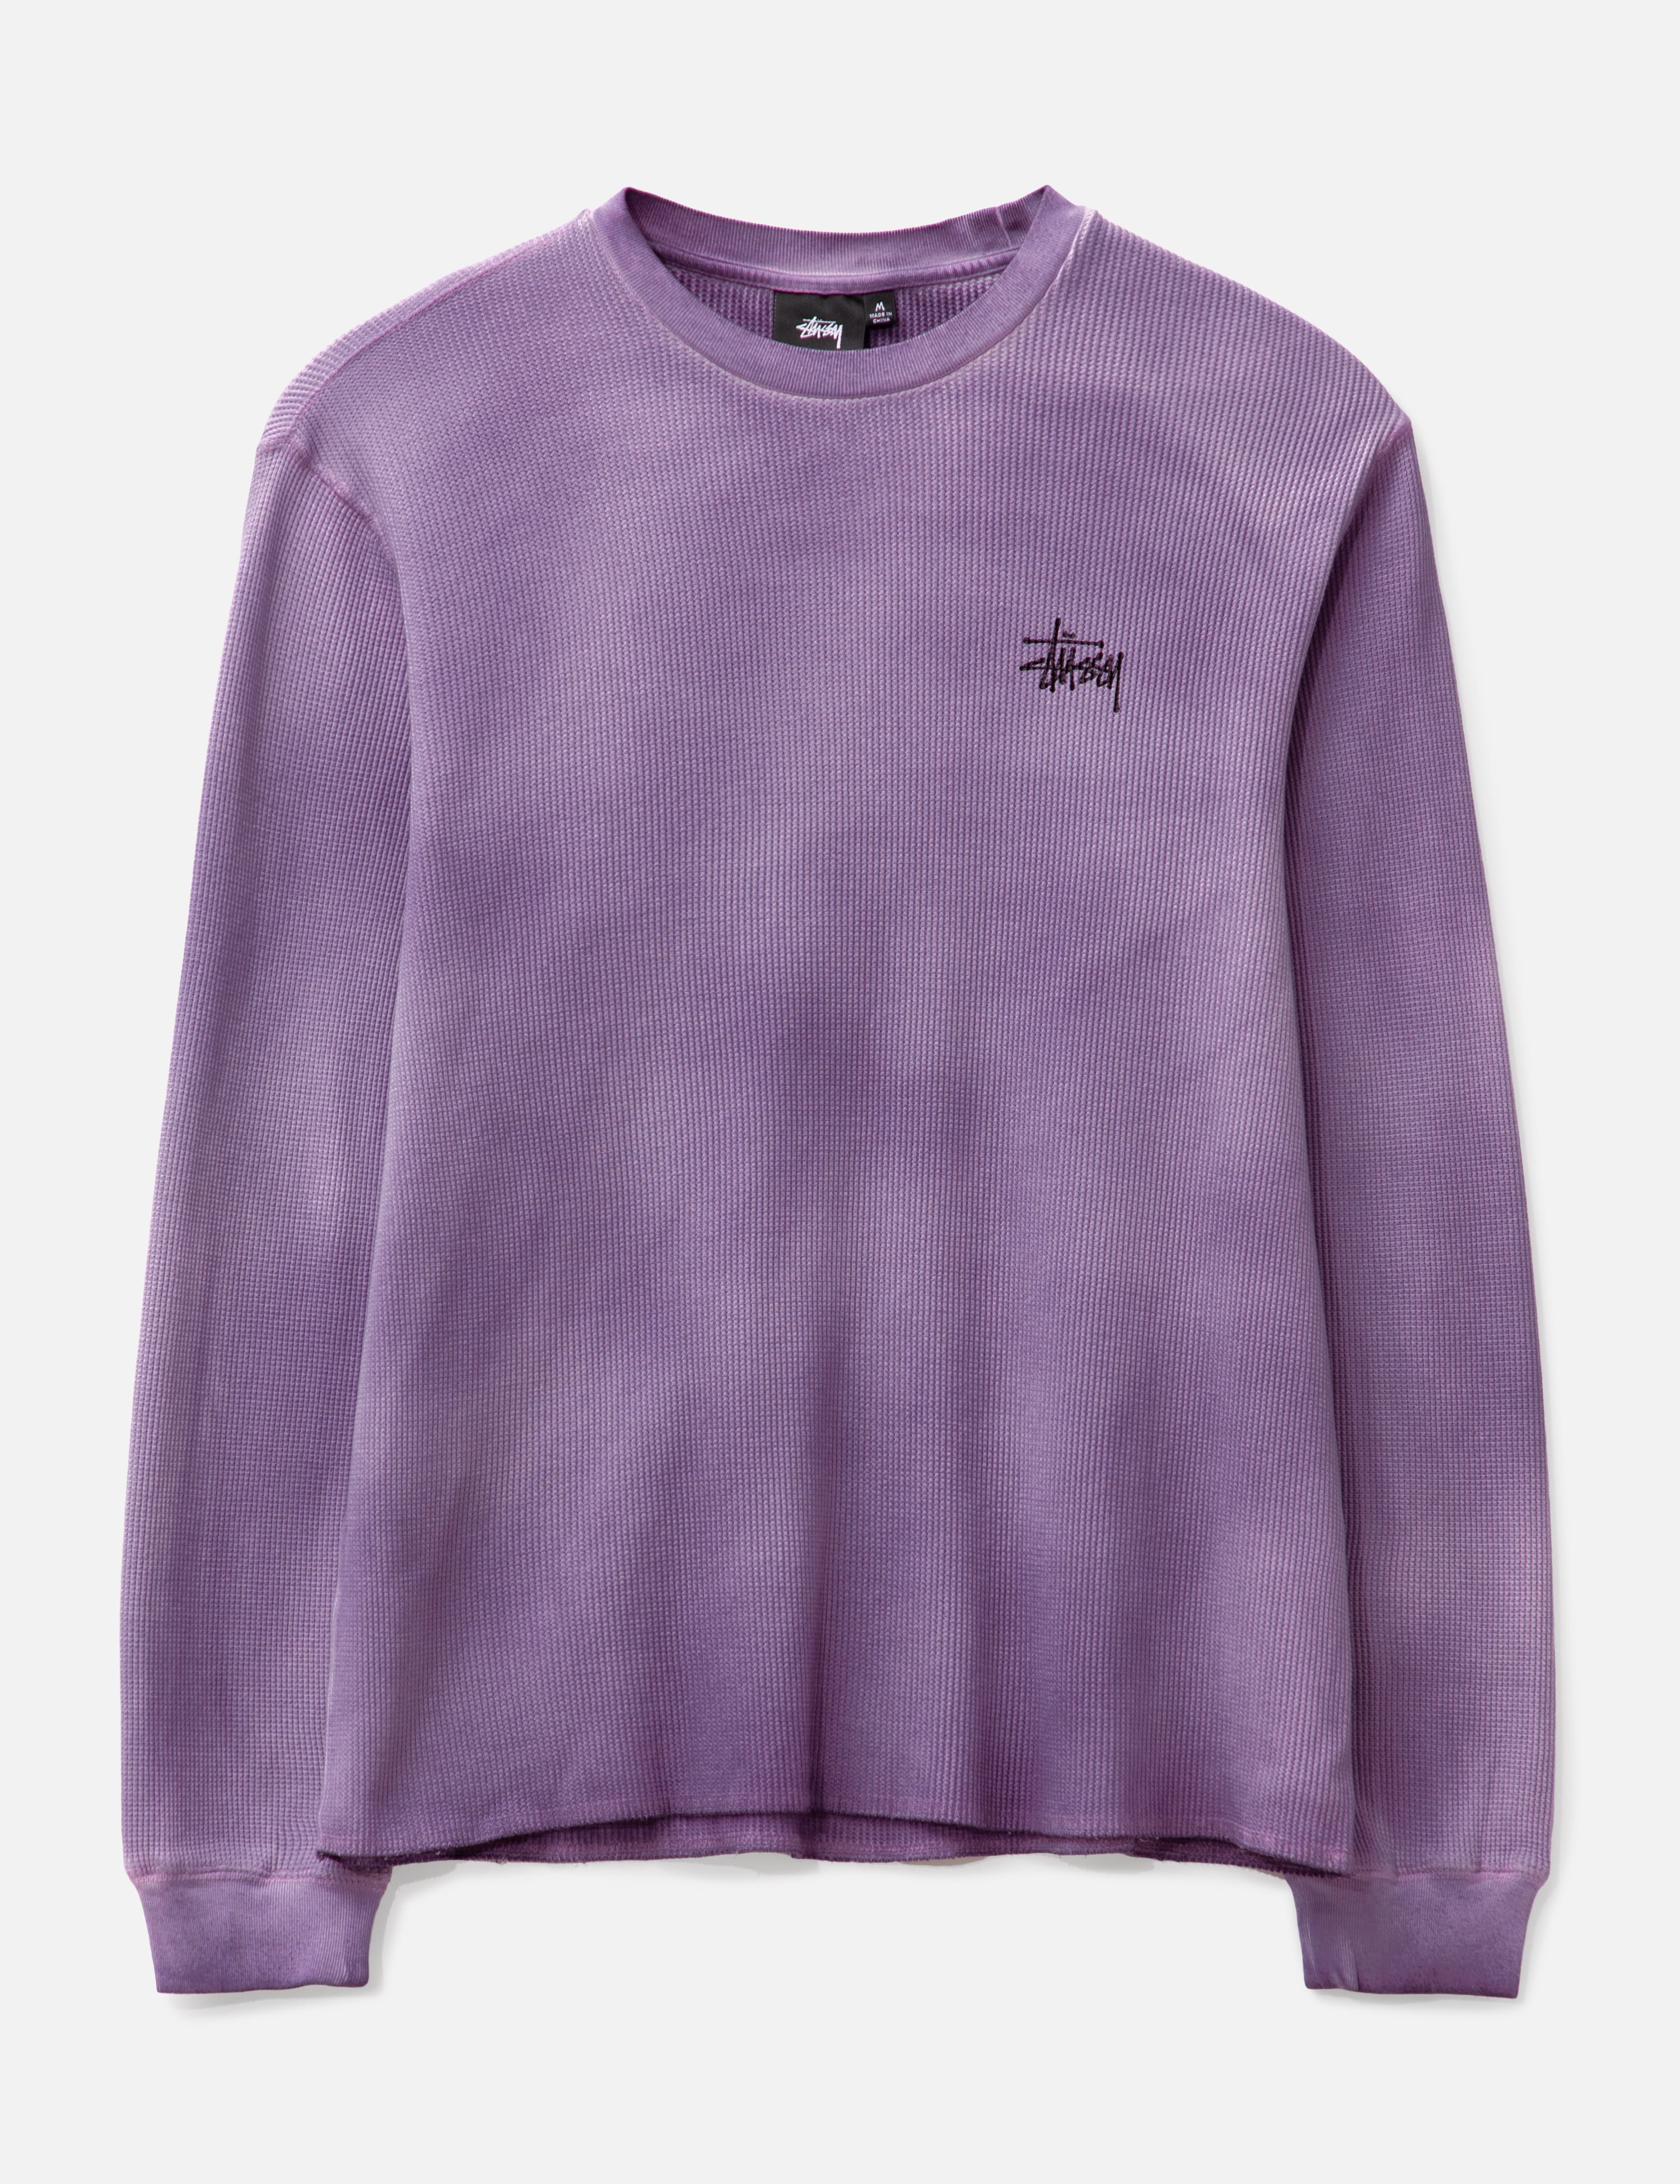 Stüssy - Basic Stock Long Sleeve Thermal | HBX - Globally Curated